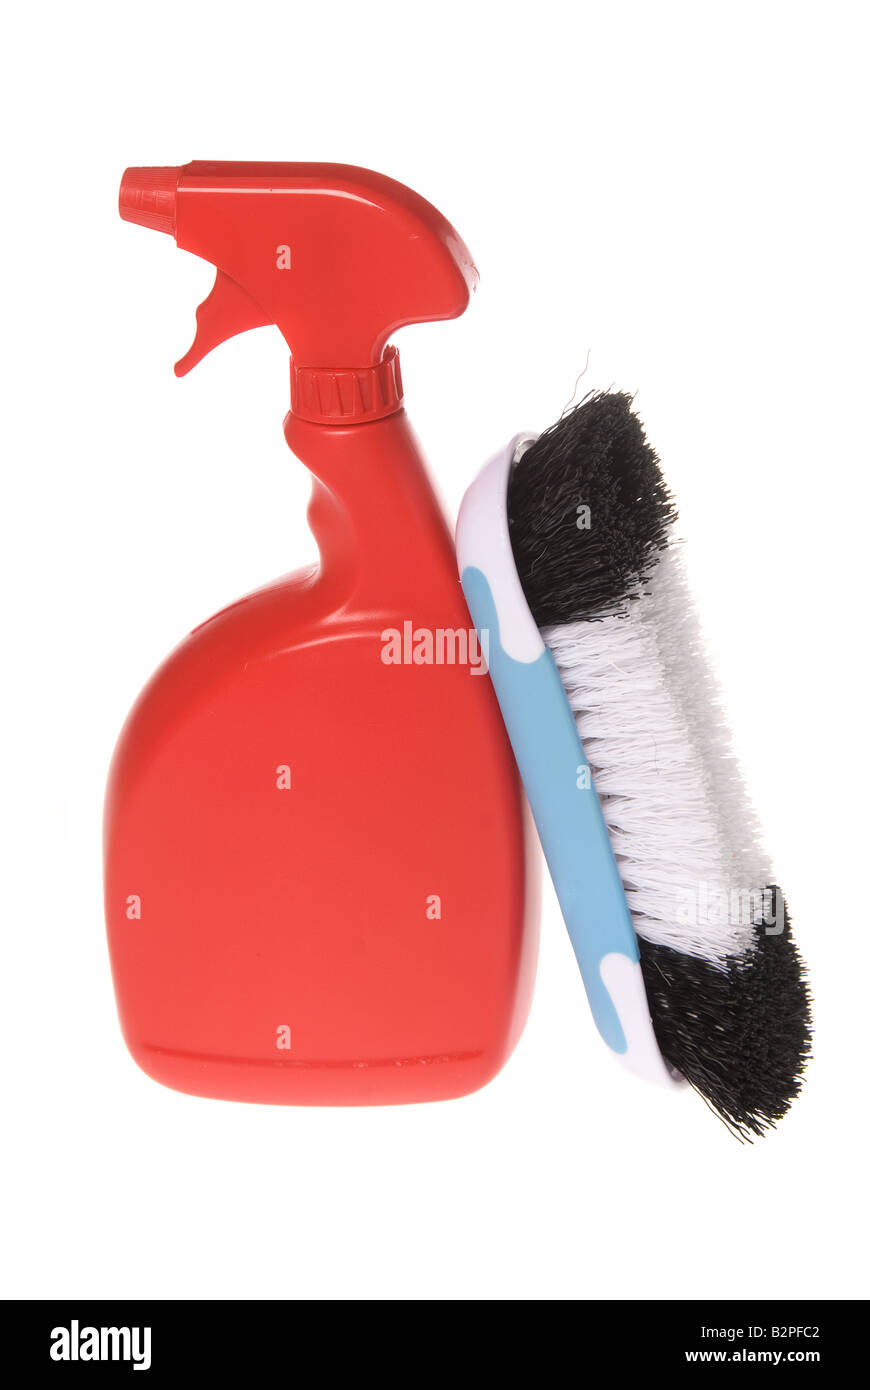 Dirtbusters stove cleaner on a white background Stock Photo - Alamy